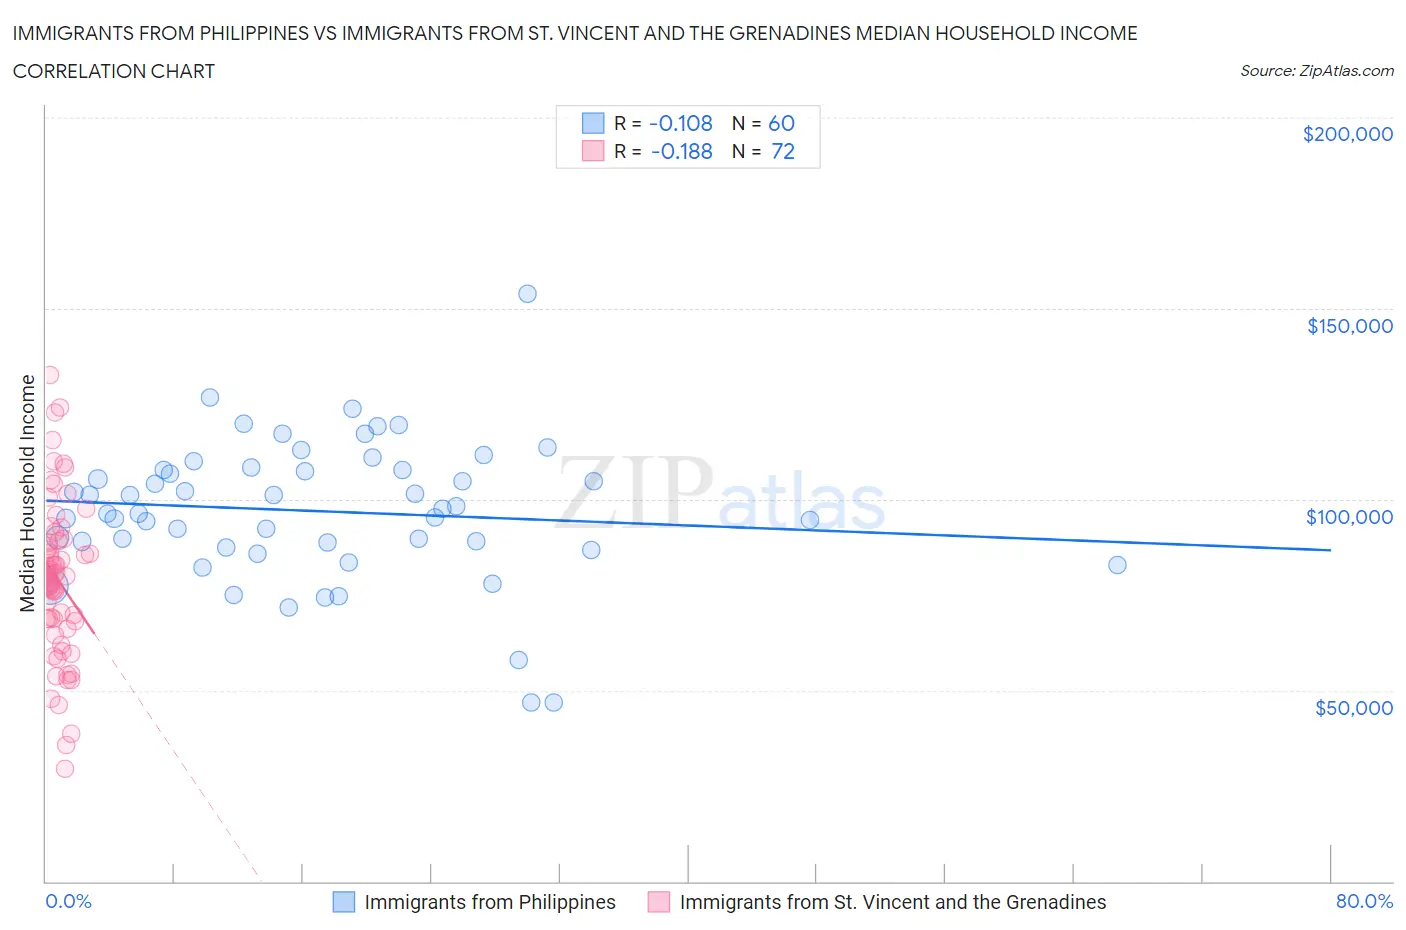 Immigrants from Philippines vs Immigrants from St. Vincent and the Grenadines Median Household Income